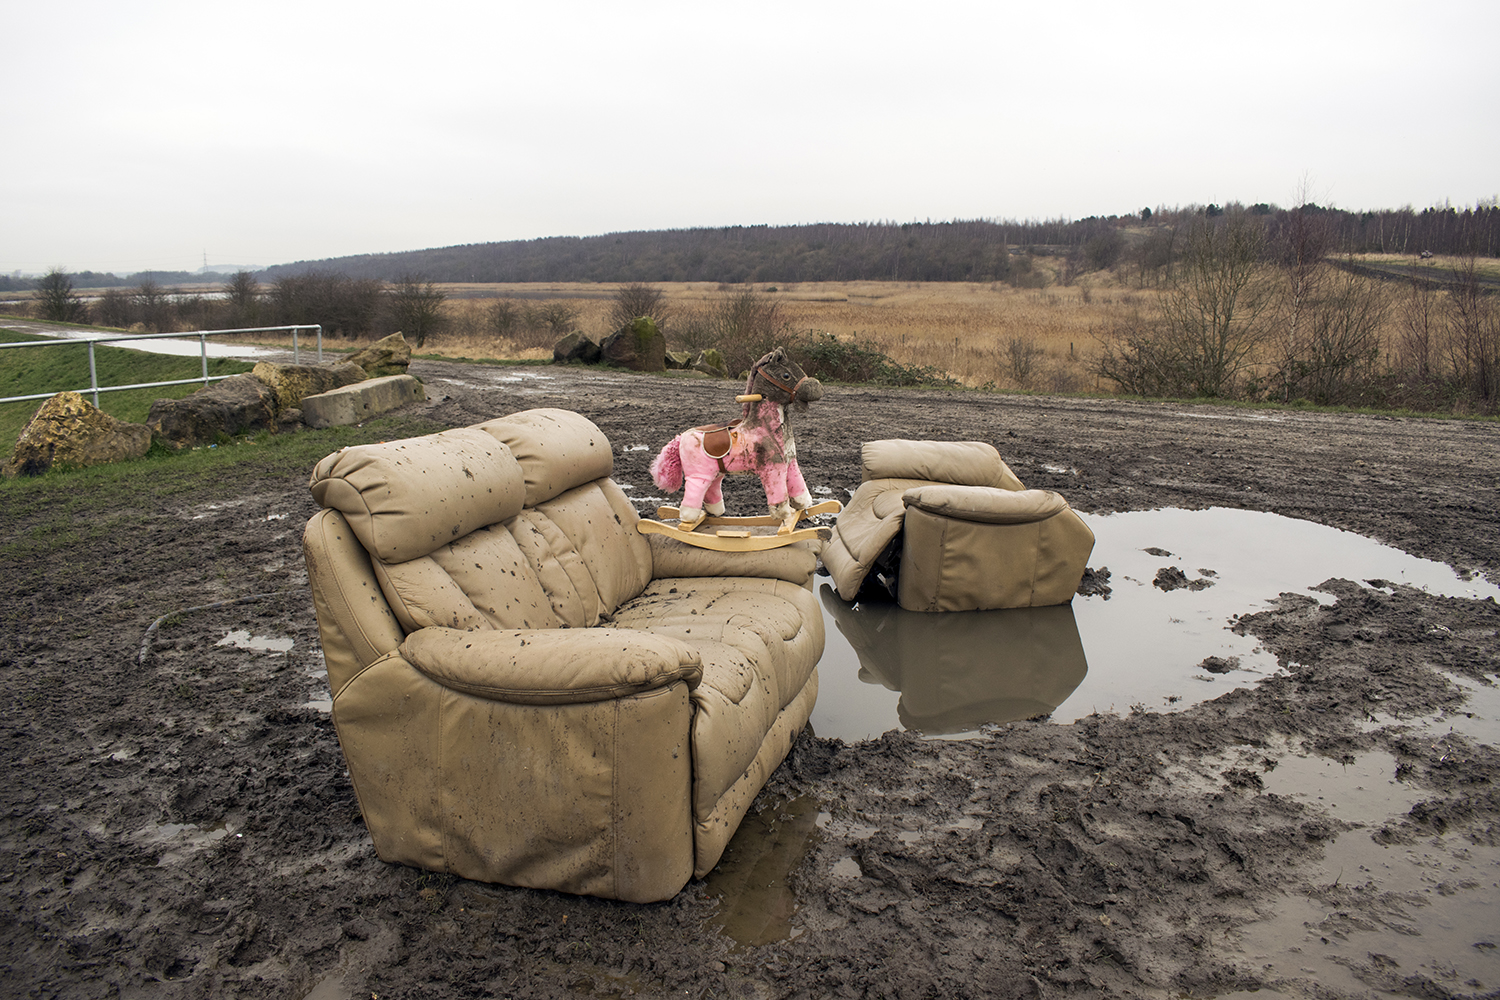 An image of a fly-tipping incident